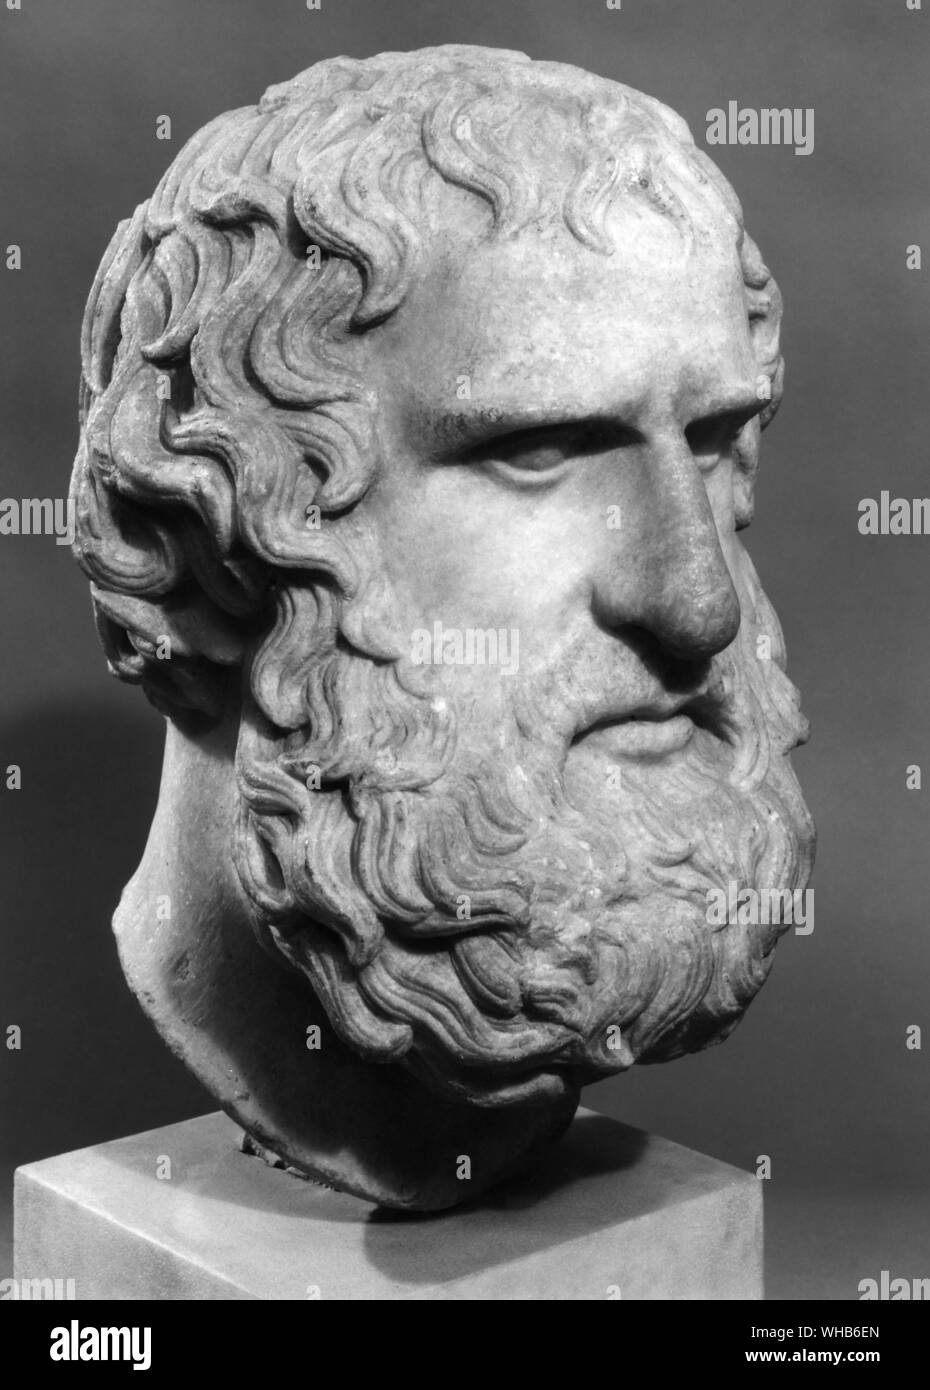 Head of Uripedes (ca. 484BC-ca 406BC ?) - According to legend, Euripides was born in Salamís on September 23, 480 BC, the day of the Persian War's greatest naval battle. Other sources estimate that he was born as early as 485 BC.. Stock Photo